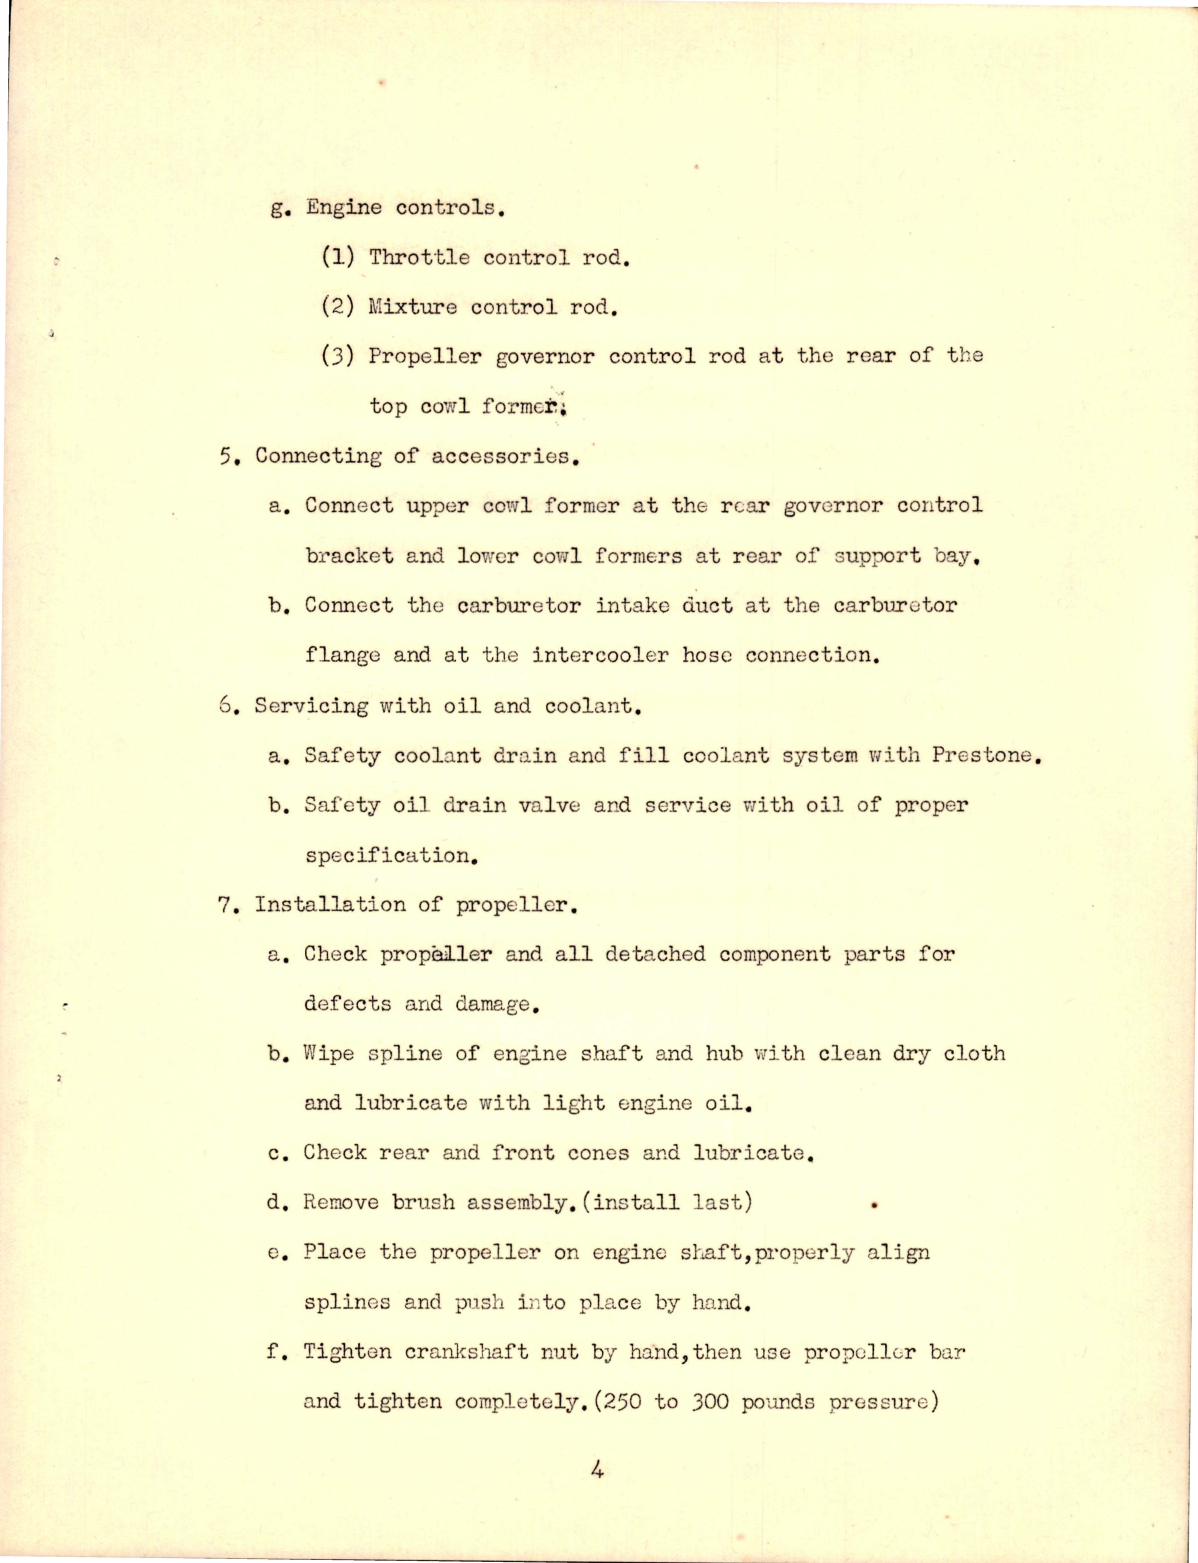 Sample page 5 from AirCorps Library document: Project Guide for Installation of V-1710-27 and V-1710-29 Engines in the P-38 